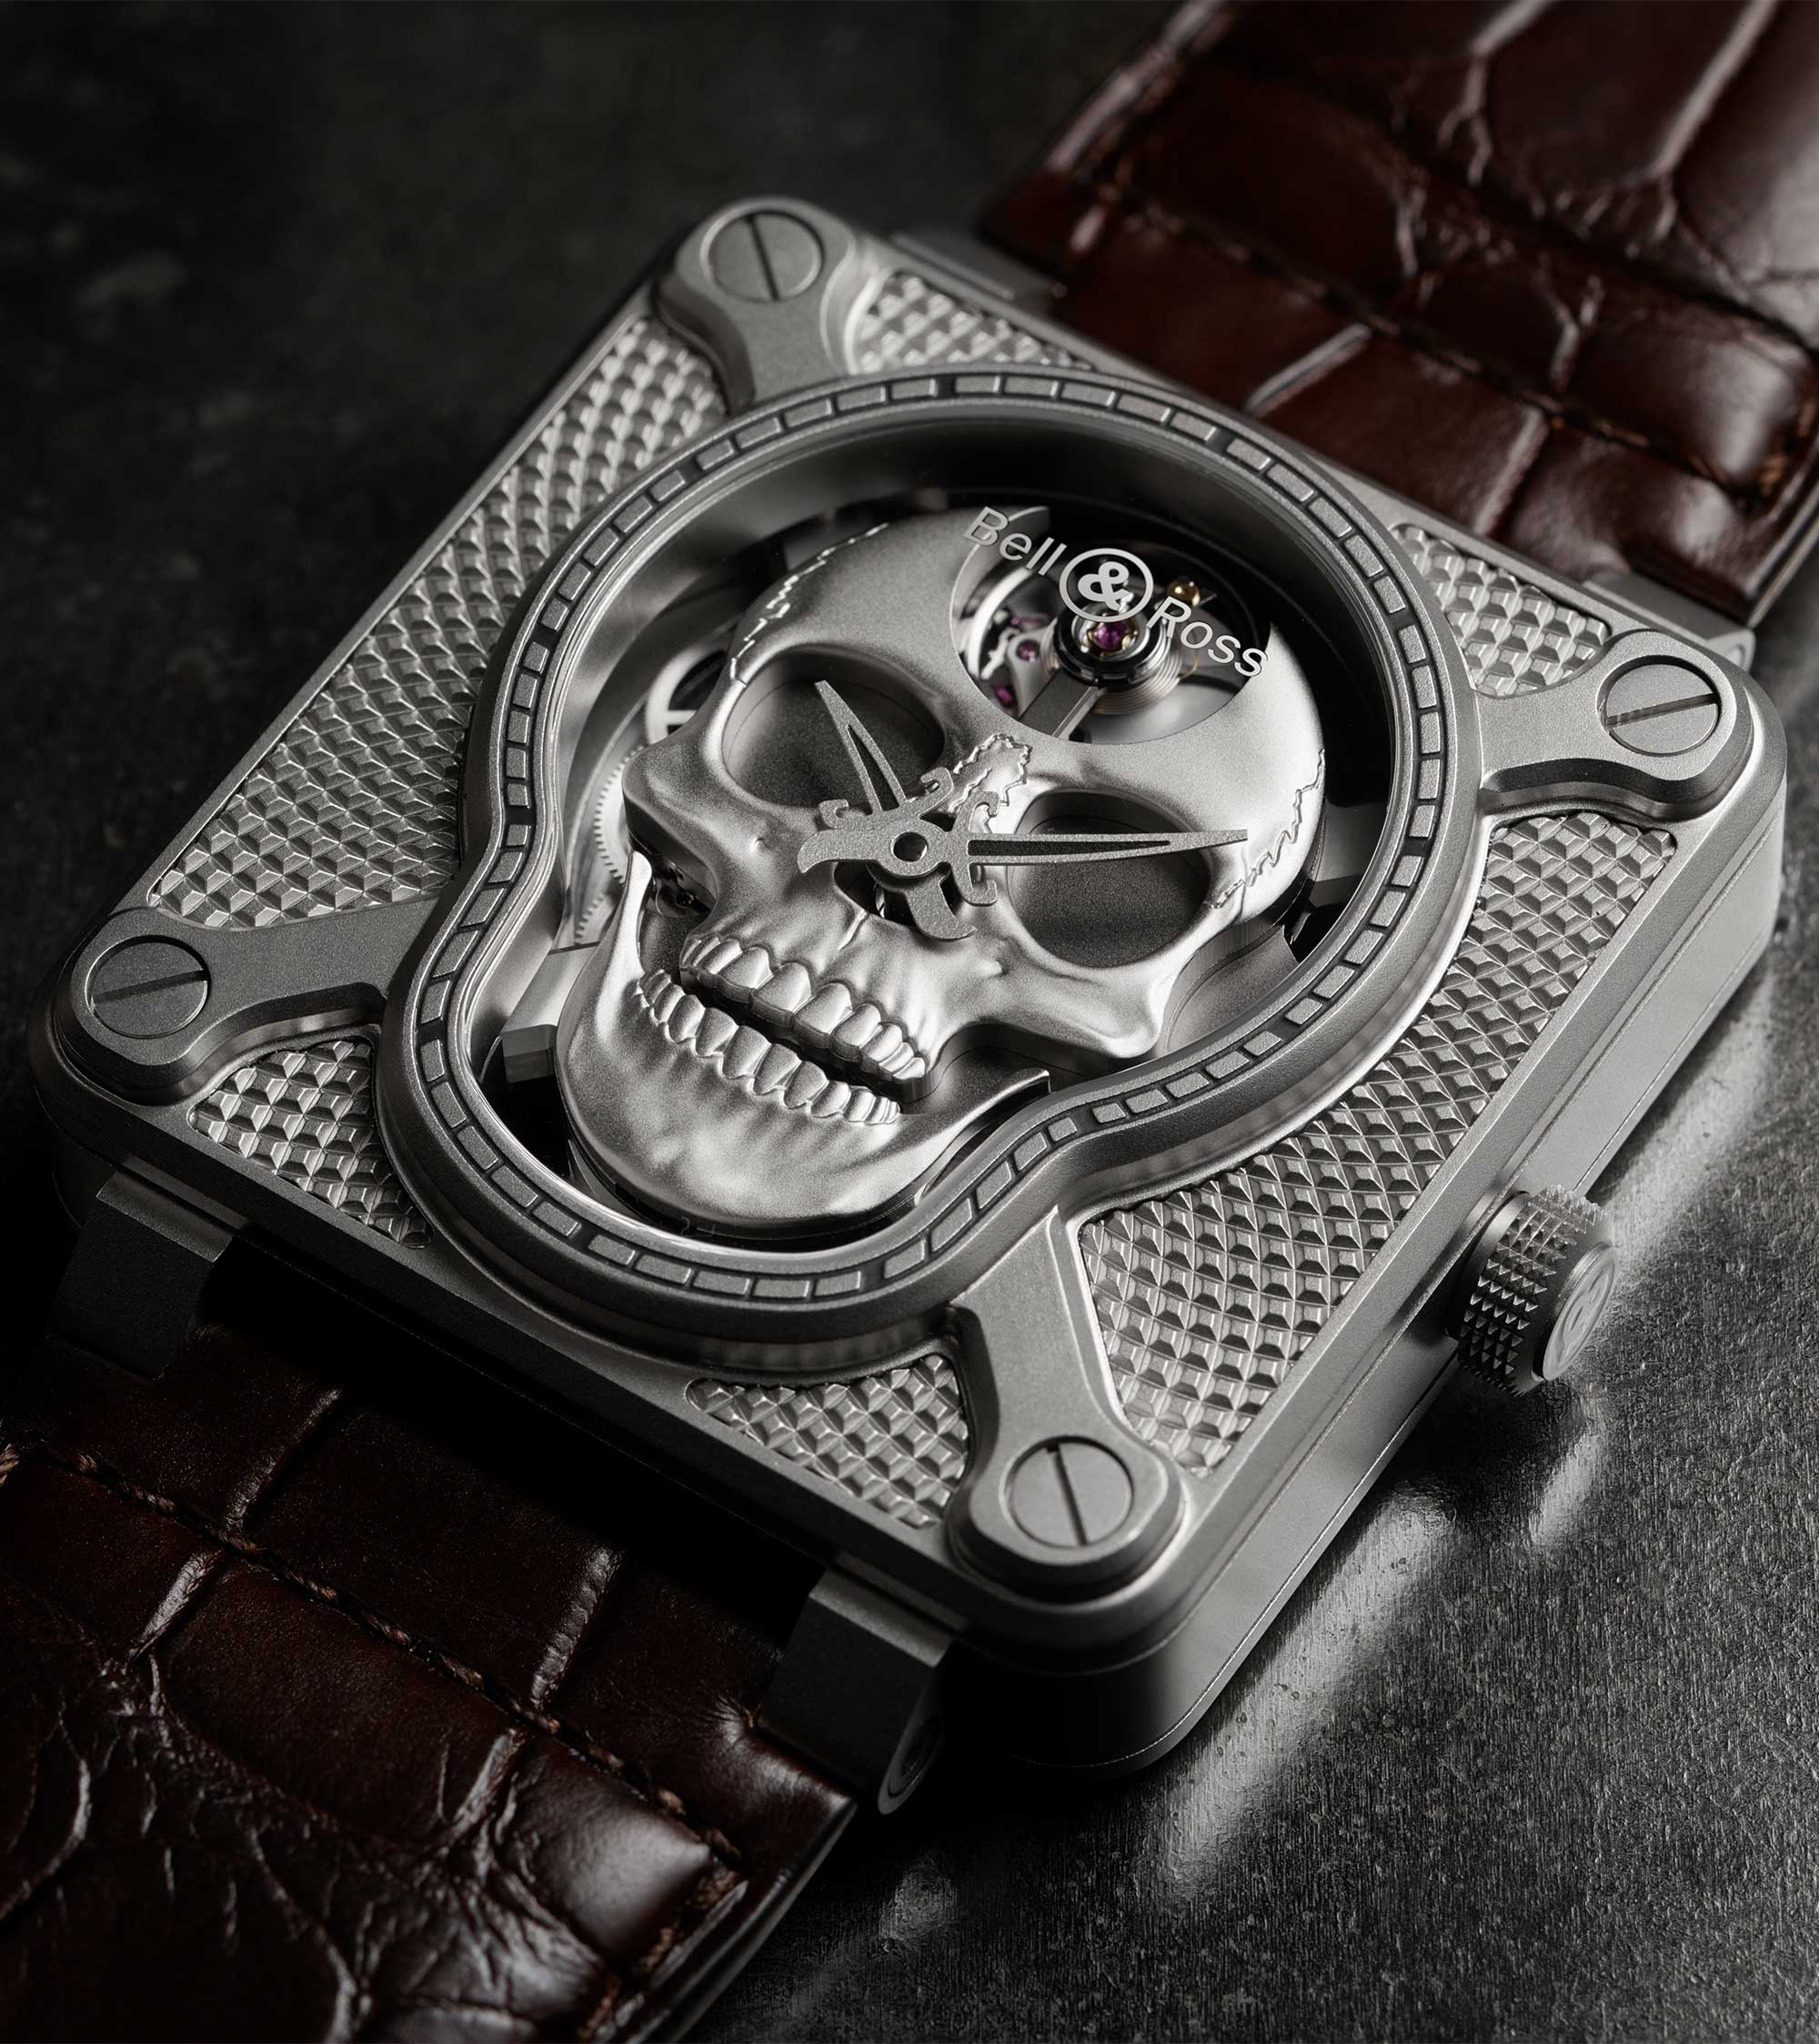 Introducing The HYT Skull – Punk Rock Meets Hydro-Mechanical Time (With  Specs And Price) | SJX Watches